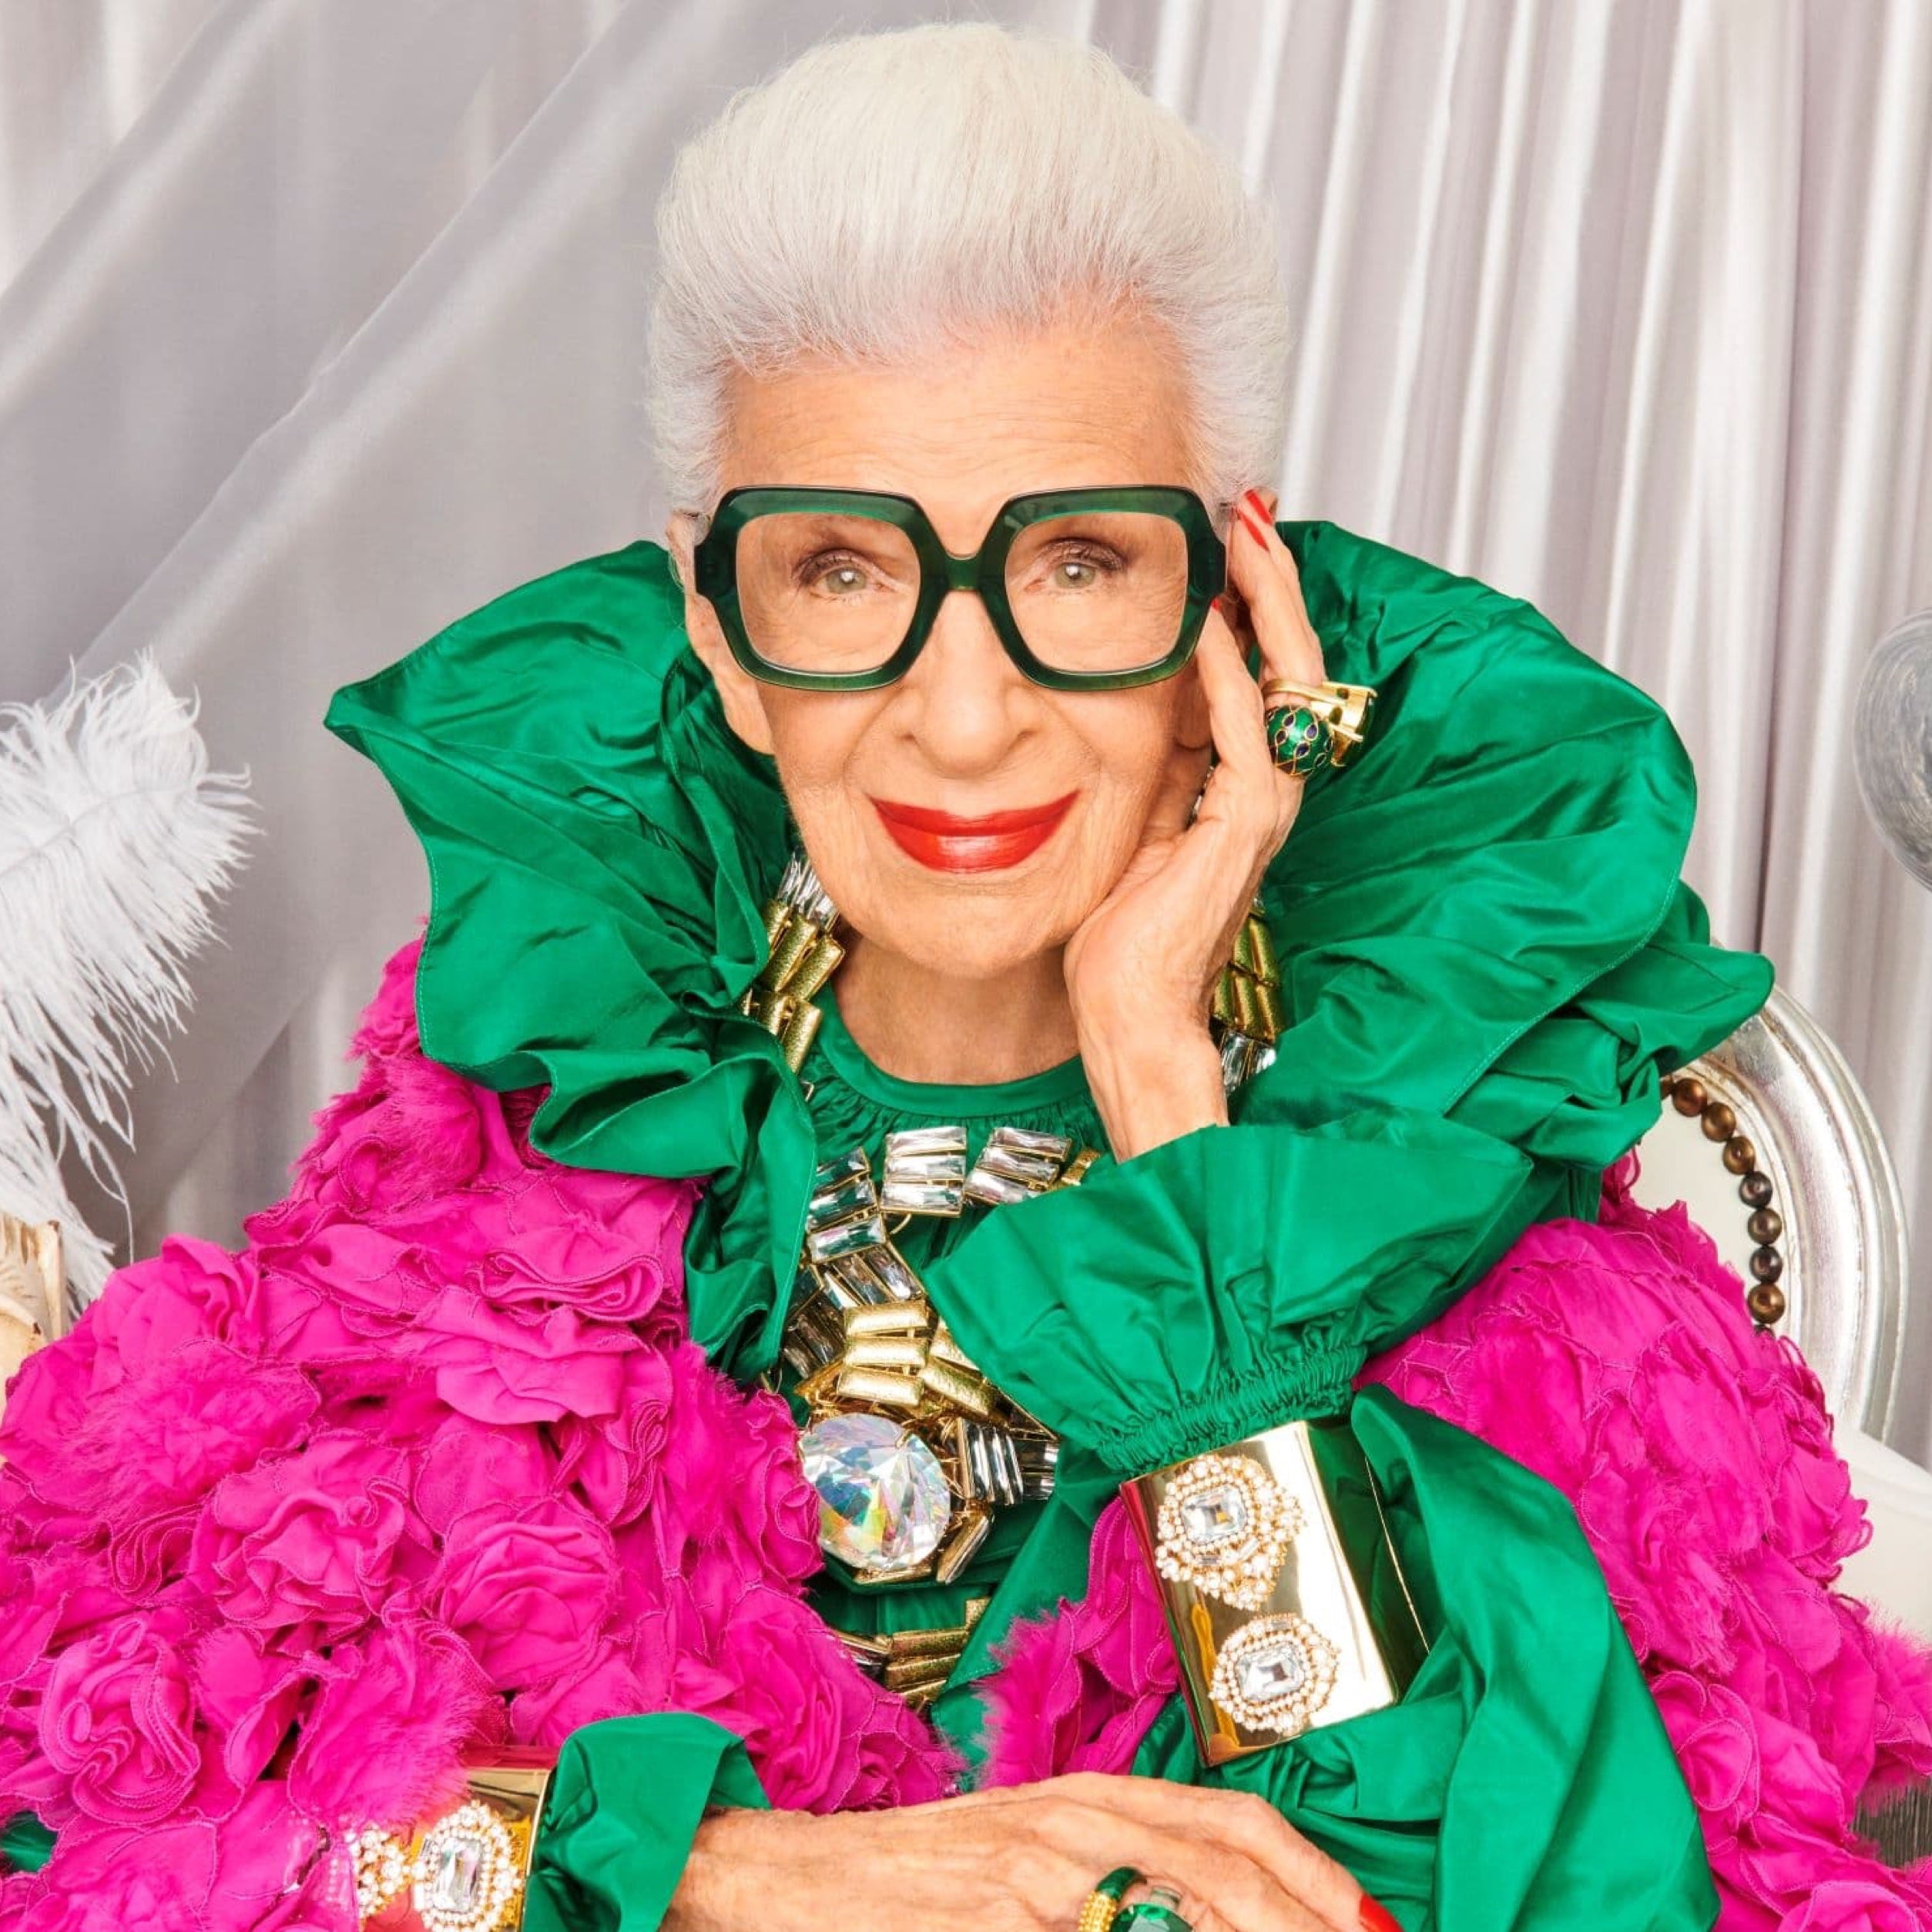 Advanced style: Iconic women rocking some crazy styles!